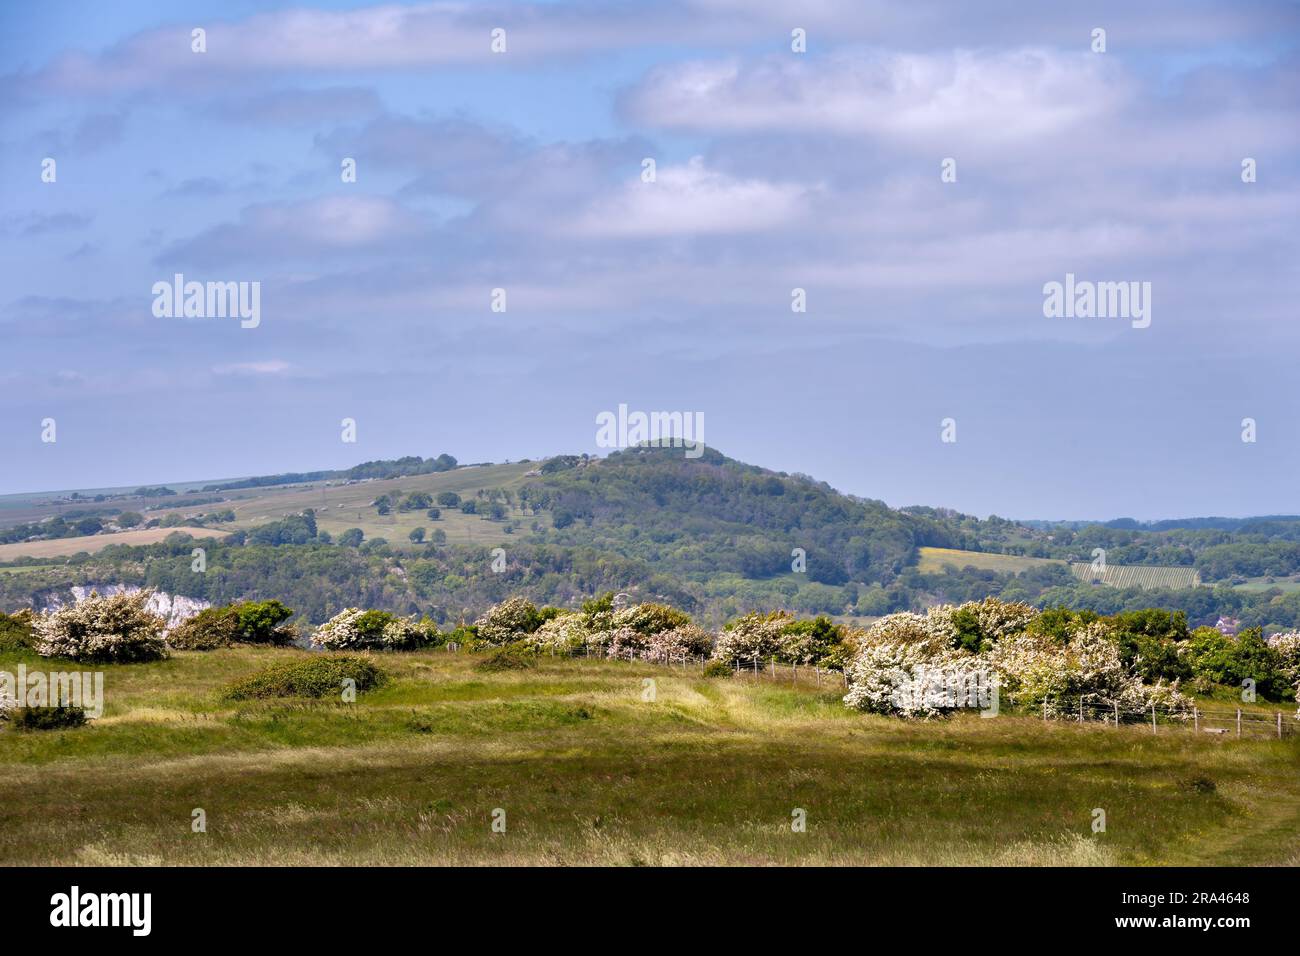 View of Malling Down nature reserve, East Sussex, England Stock Photo